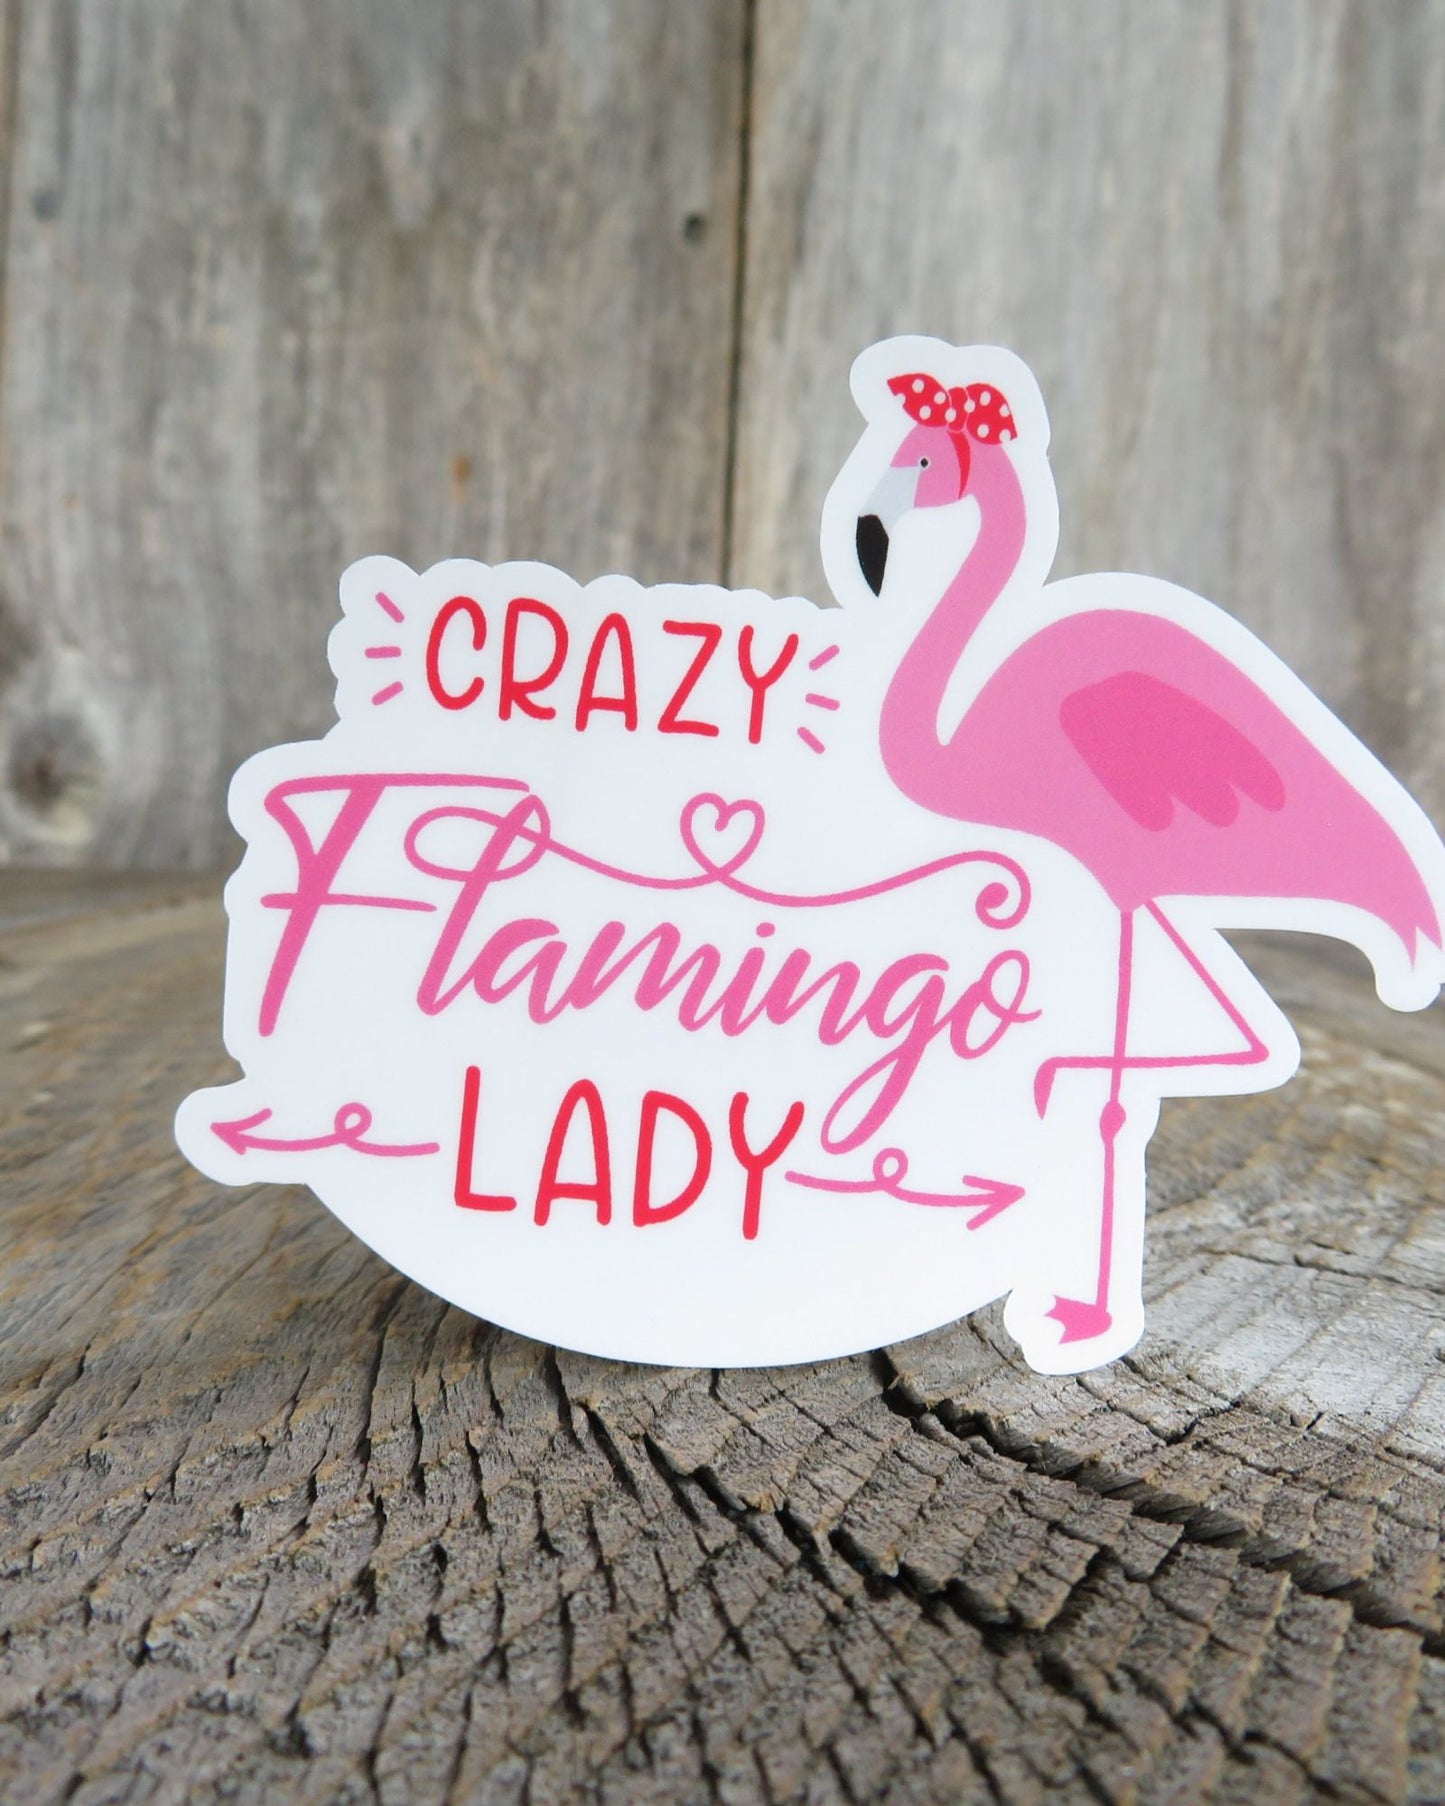 Crazy Flamingo Lady Sticker Full Color Waterproof Summer Funny Bird Lover Pink